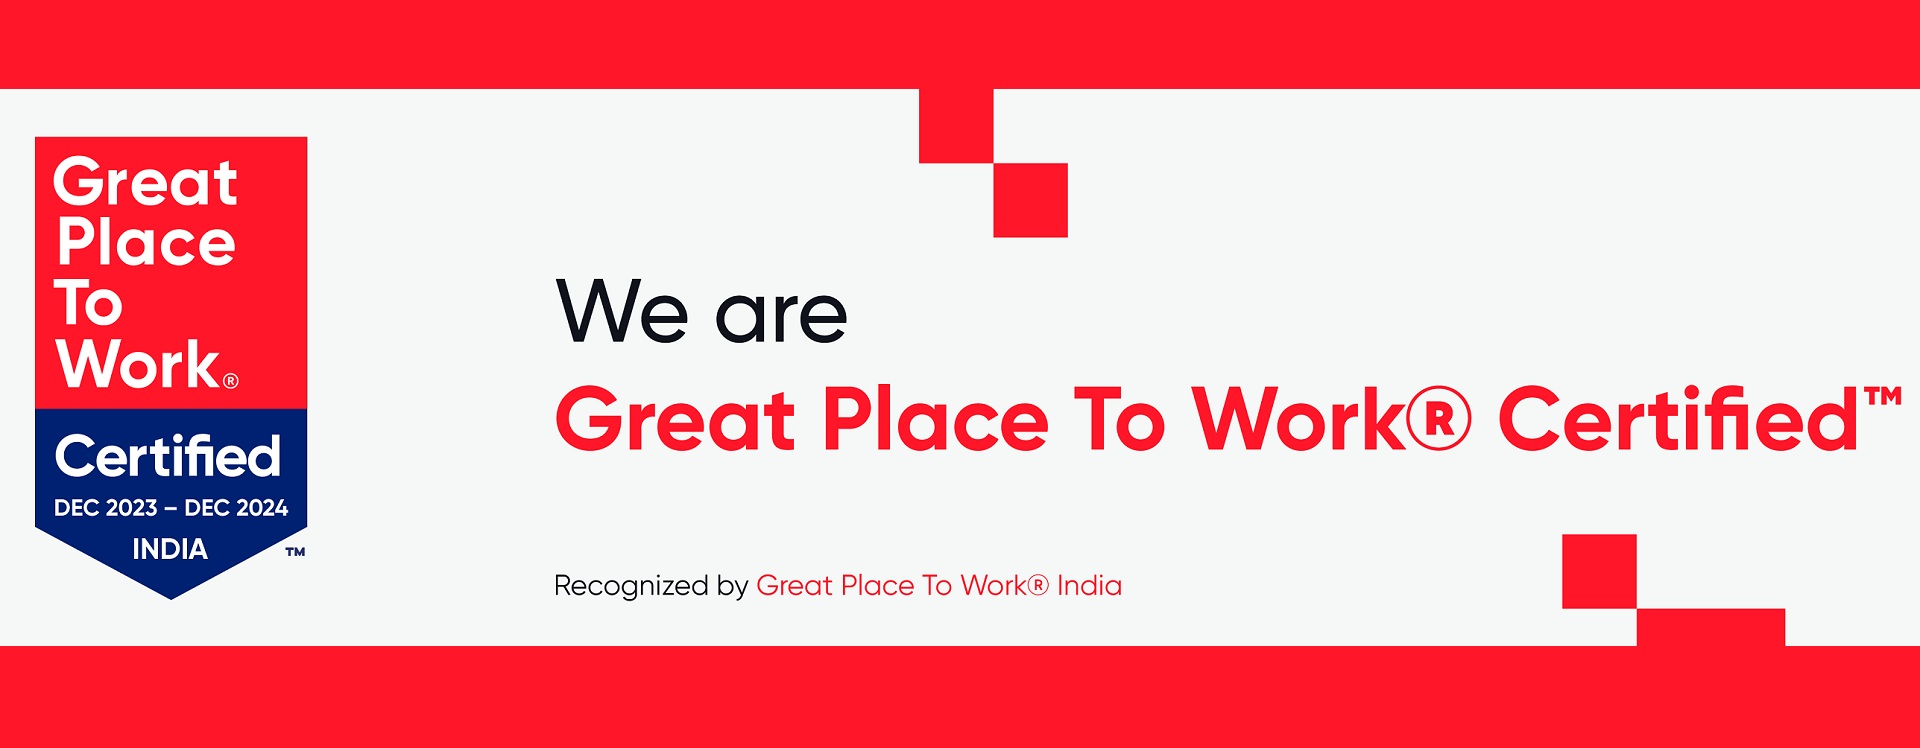 IIMV is Now Great Place to Work Certified